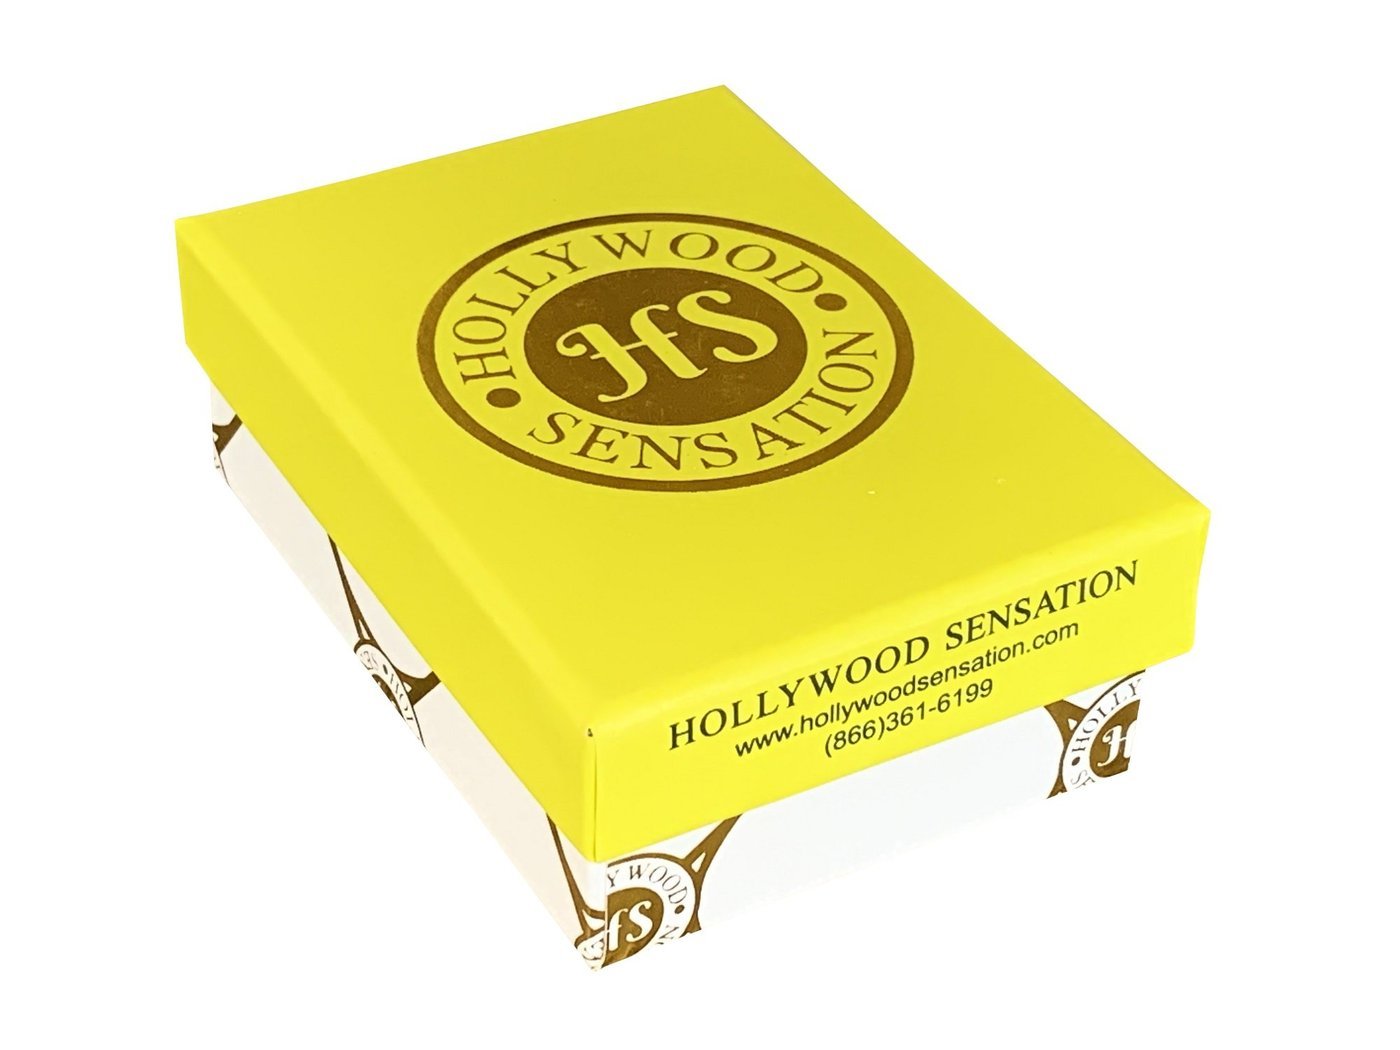 Gold Furry Friends Bracelets, Engraved Furiends leave paw print in your heart- Paw Prints ( Furry Friends) - Hollywood Sensation®